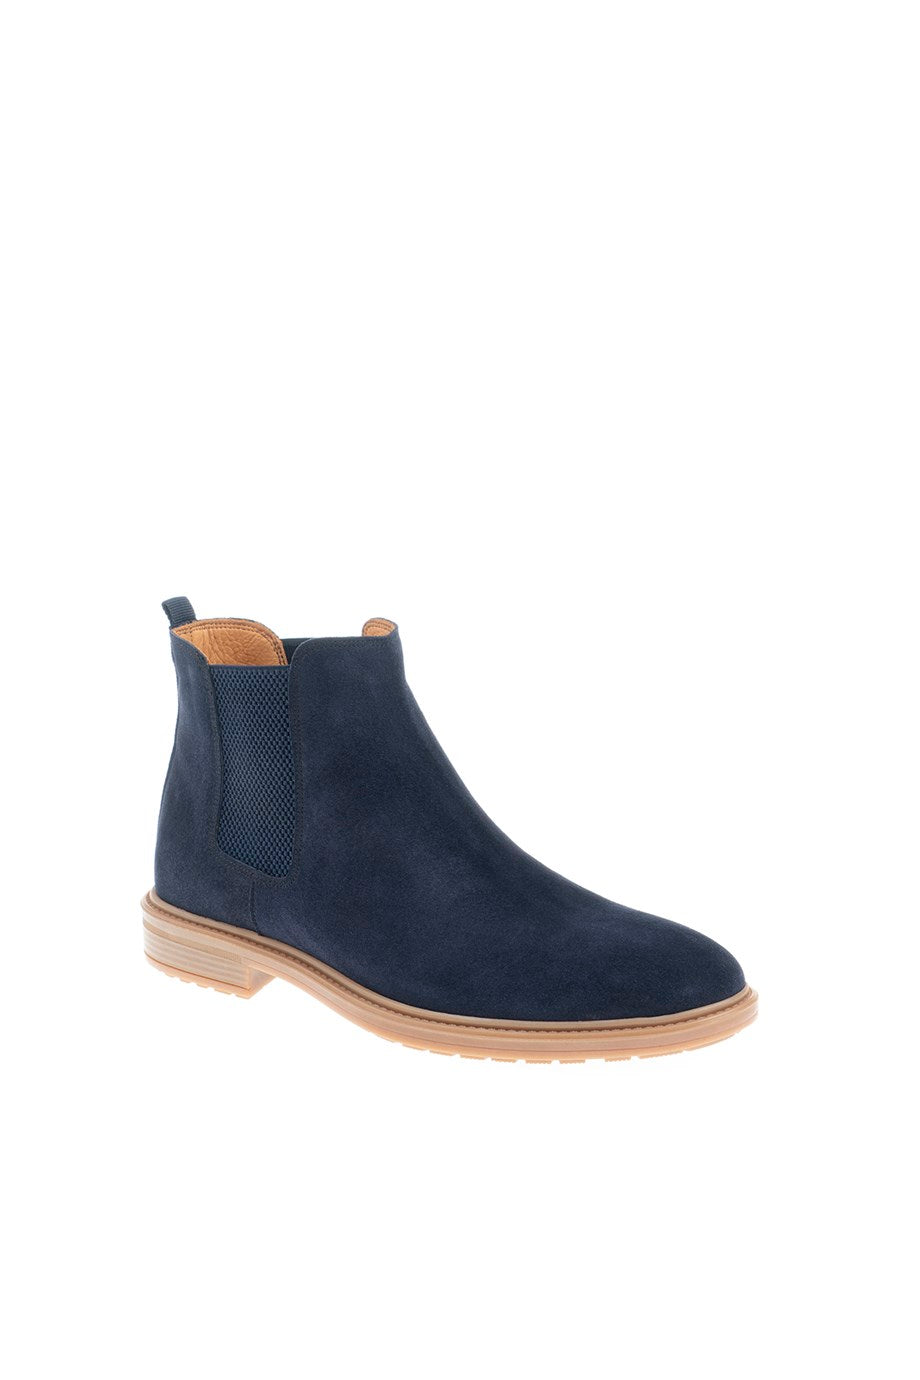 Eva Sole Genuine Suede Leather Chelsea Boots - MENSTYLEWITH